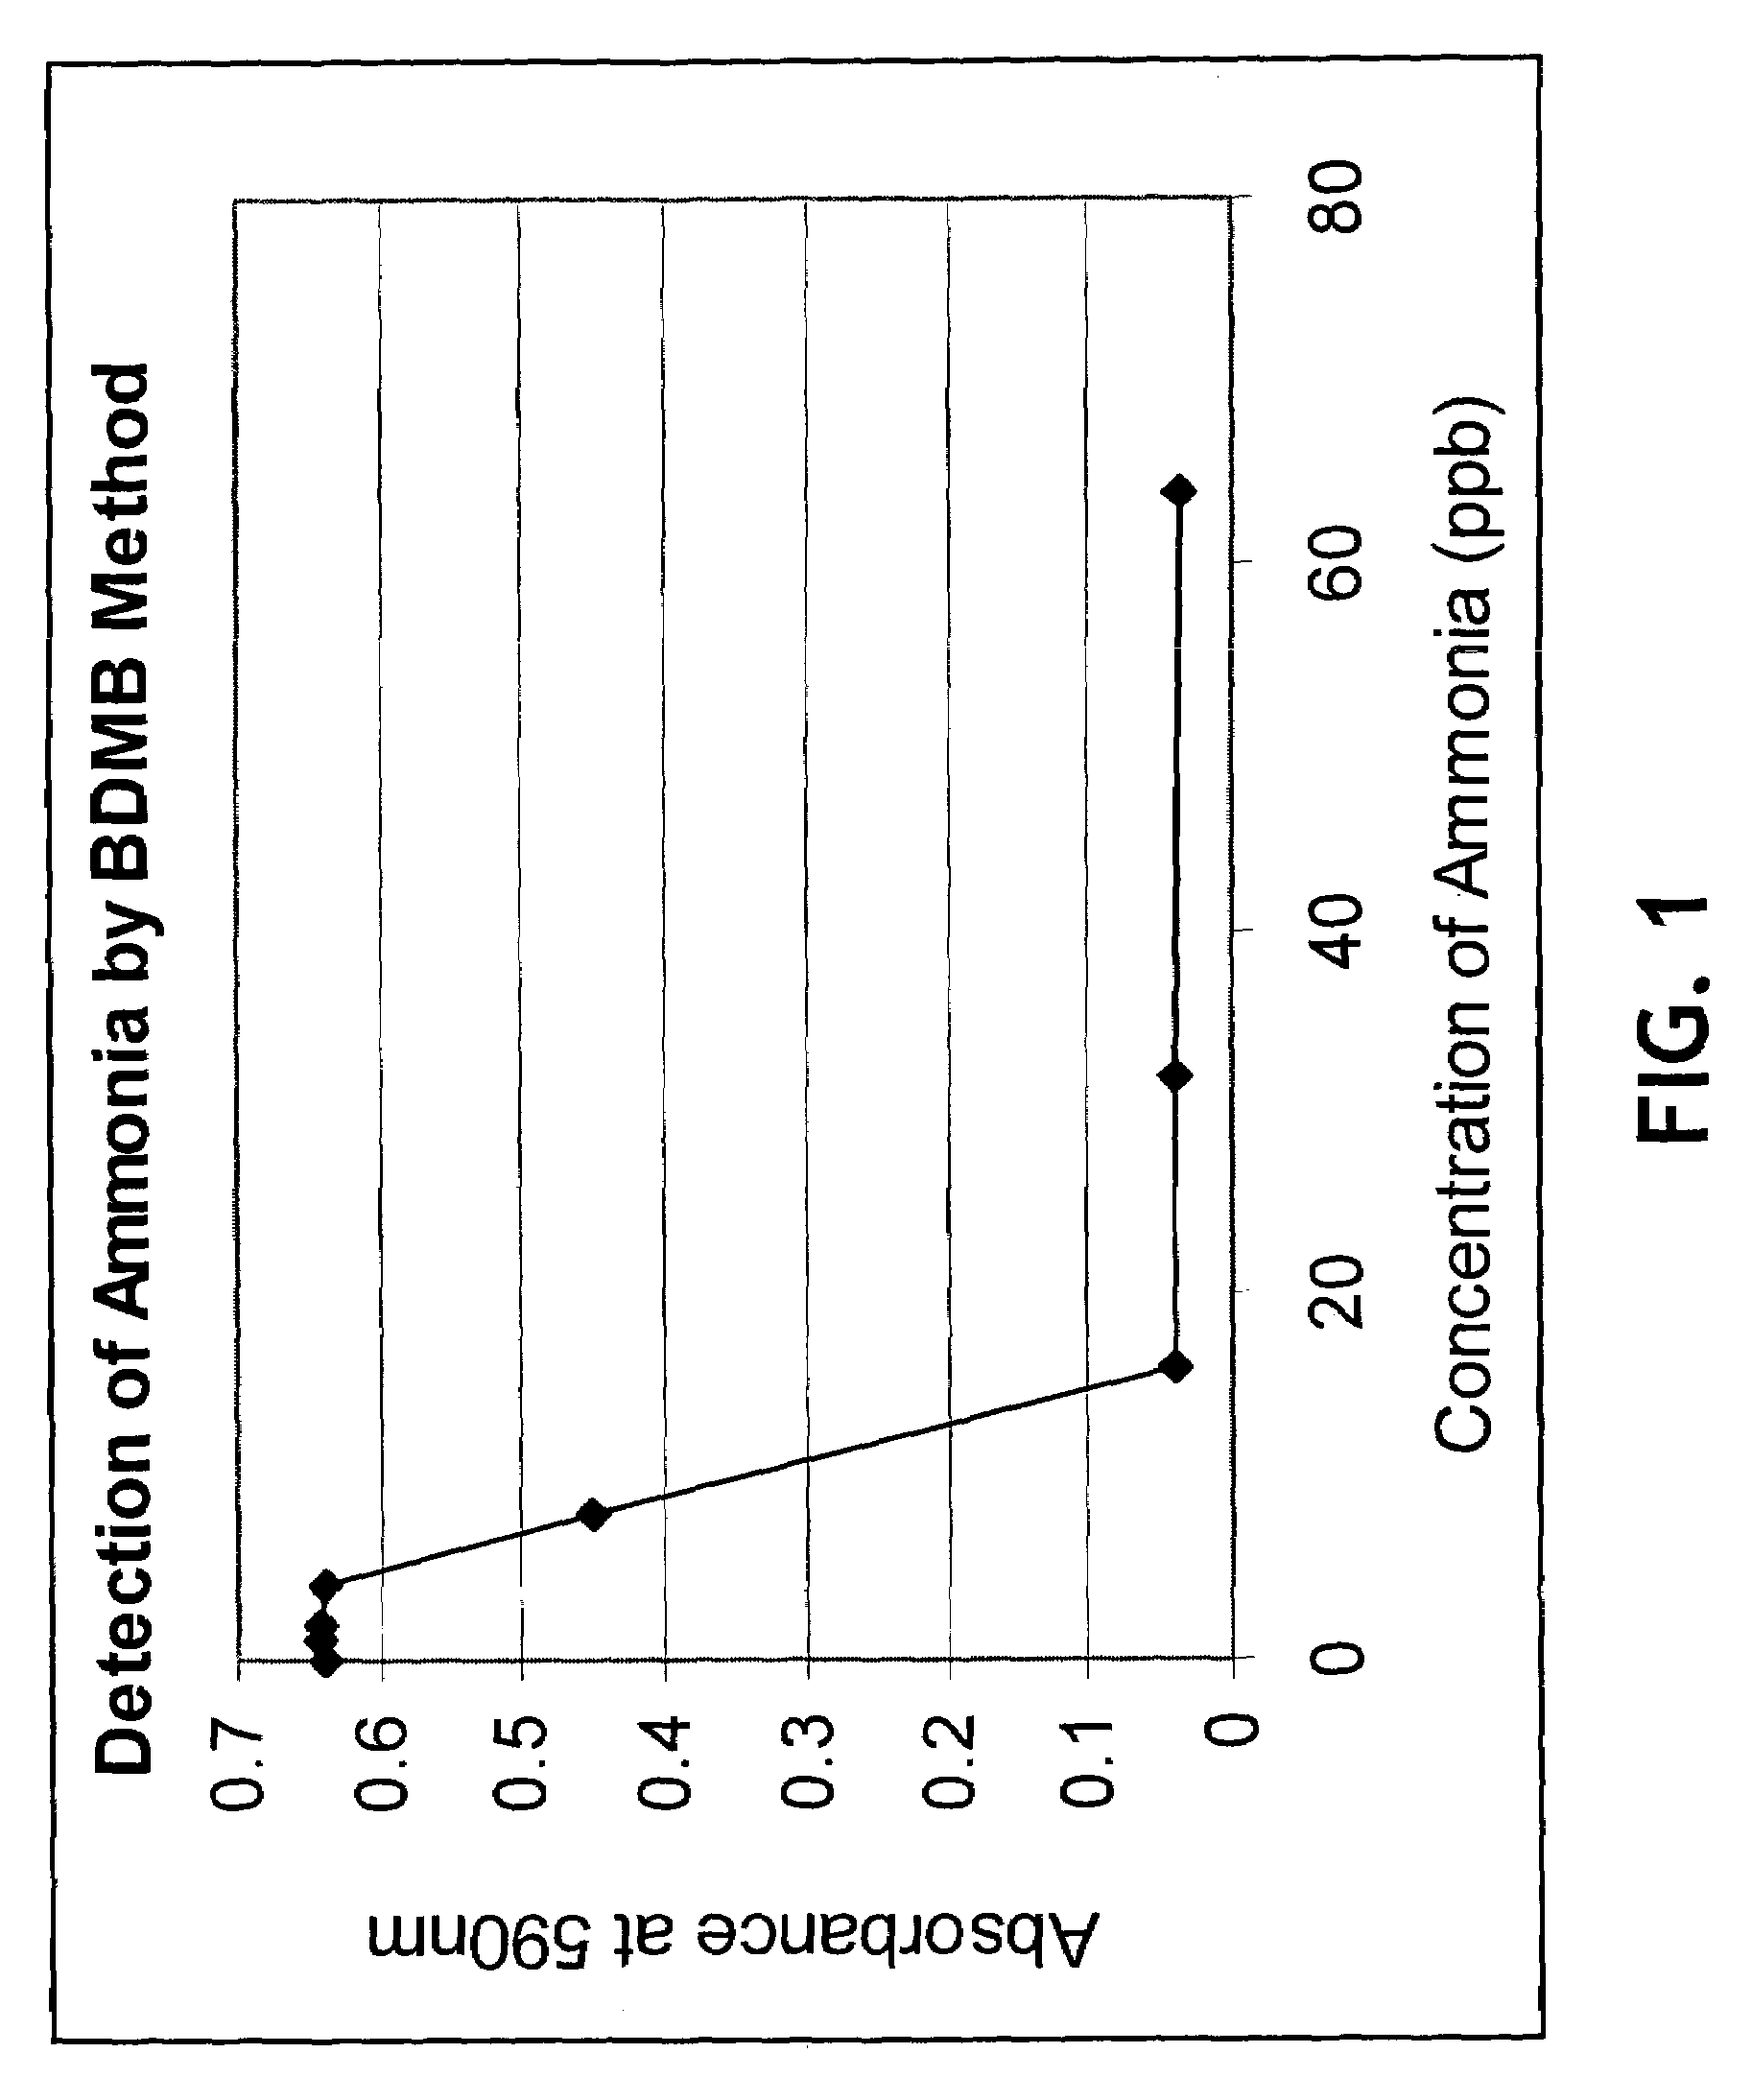 Method and device for detecting ammonia odors and helicobacter pylori urease infection